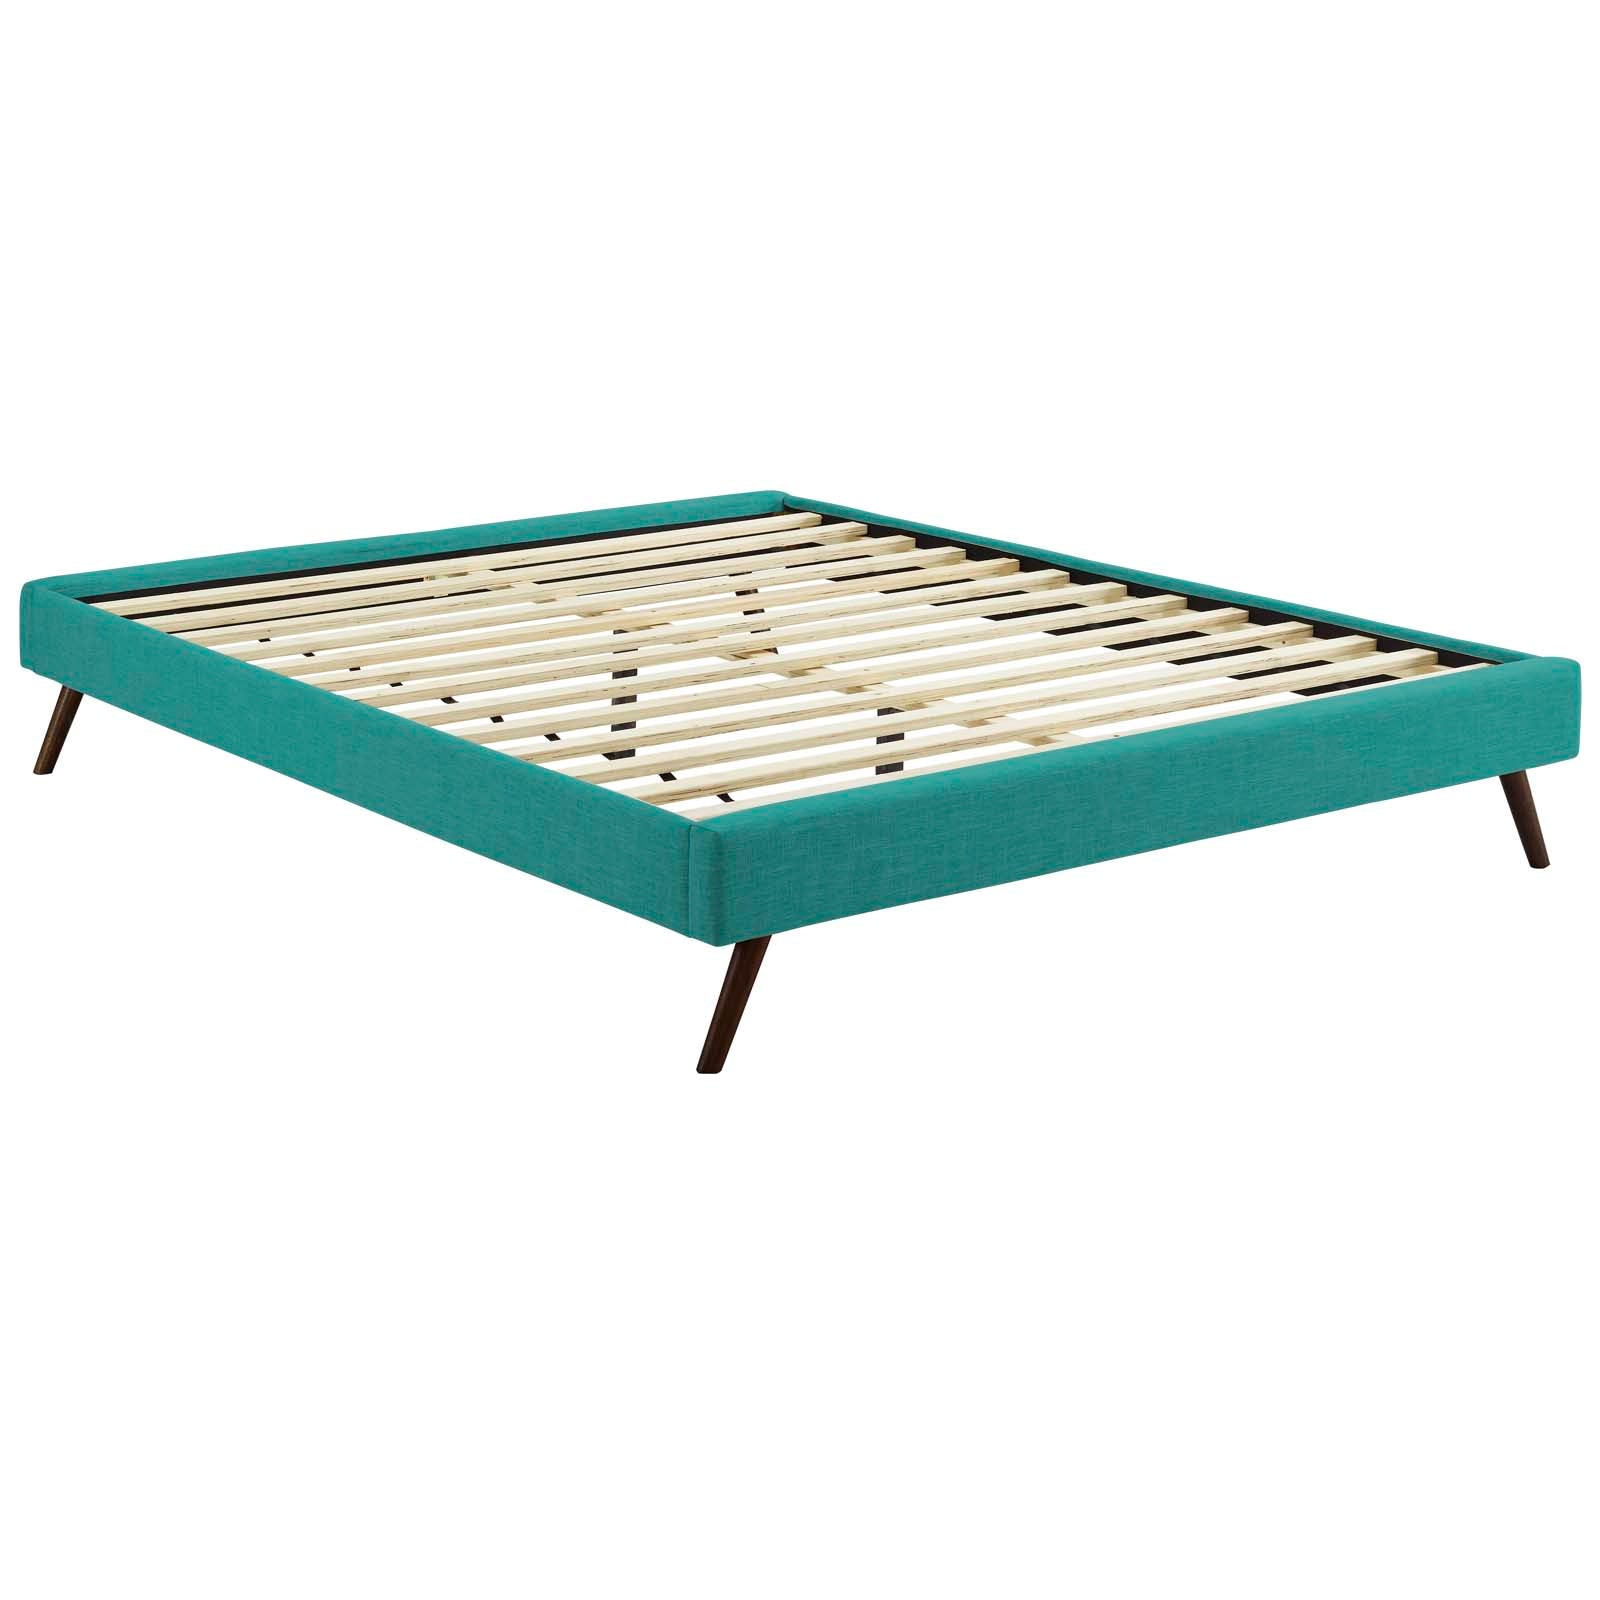 Modway Beds - Loryn King Fabric Bed Frame with Round Splayed Legs Teal